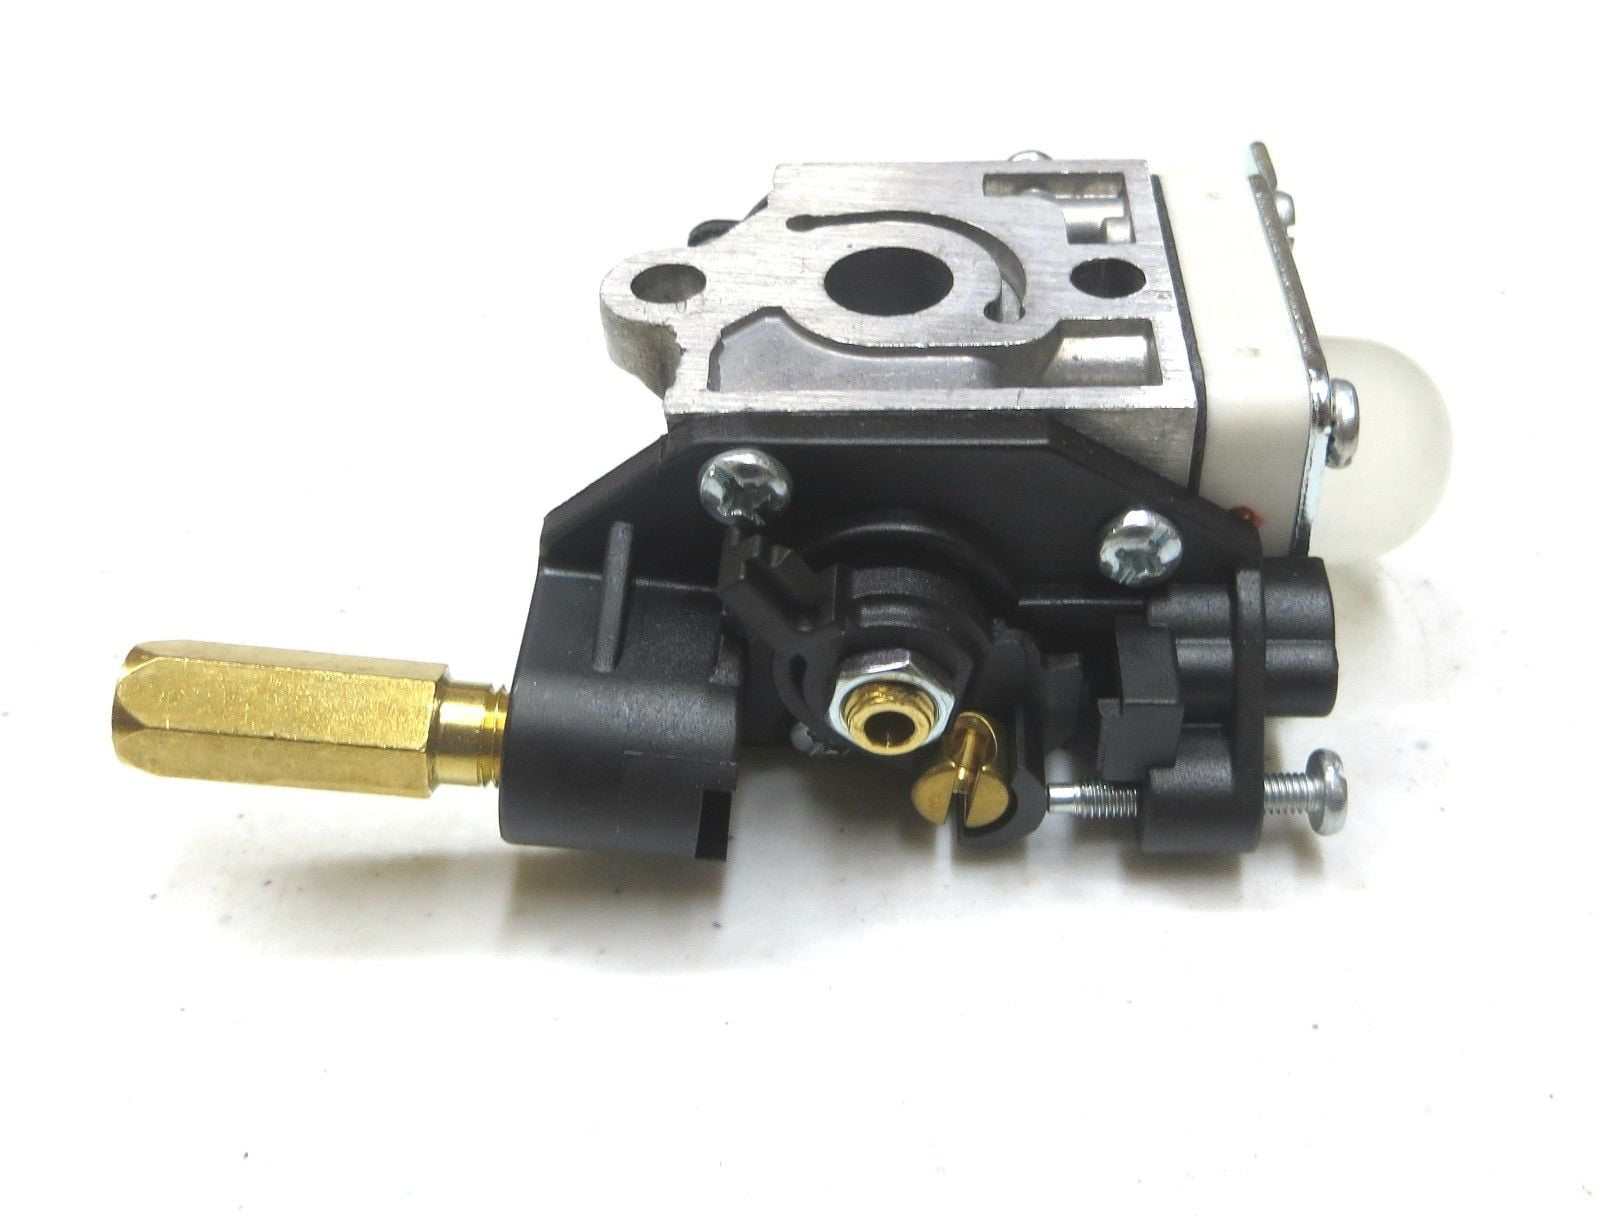 New Carb Carburetor Replaces for Zama Part # RB-K75 US Shipping 